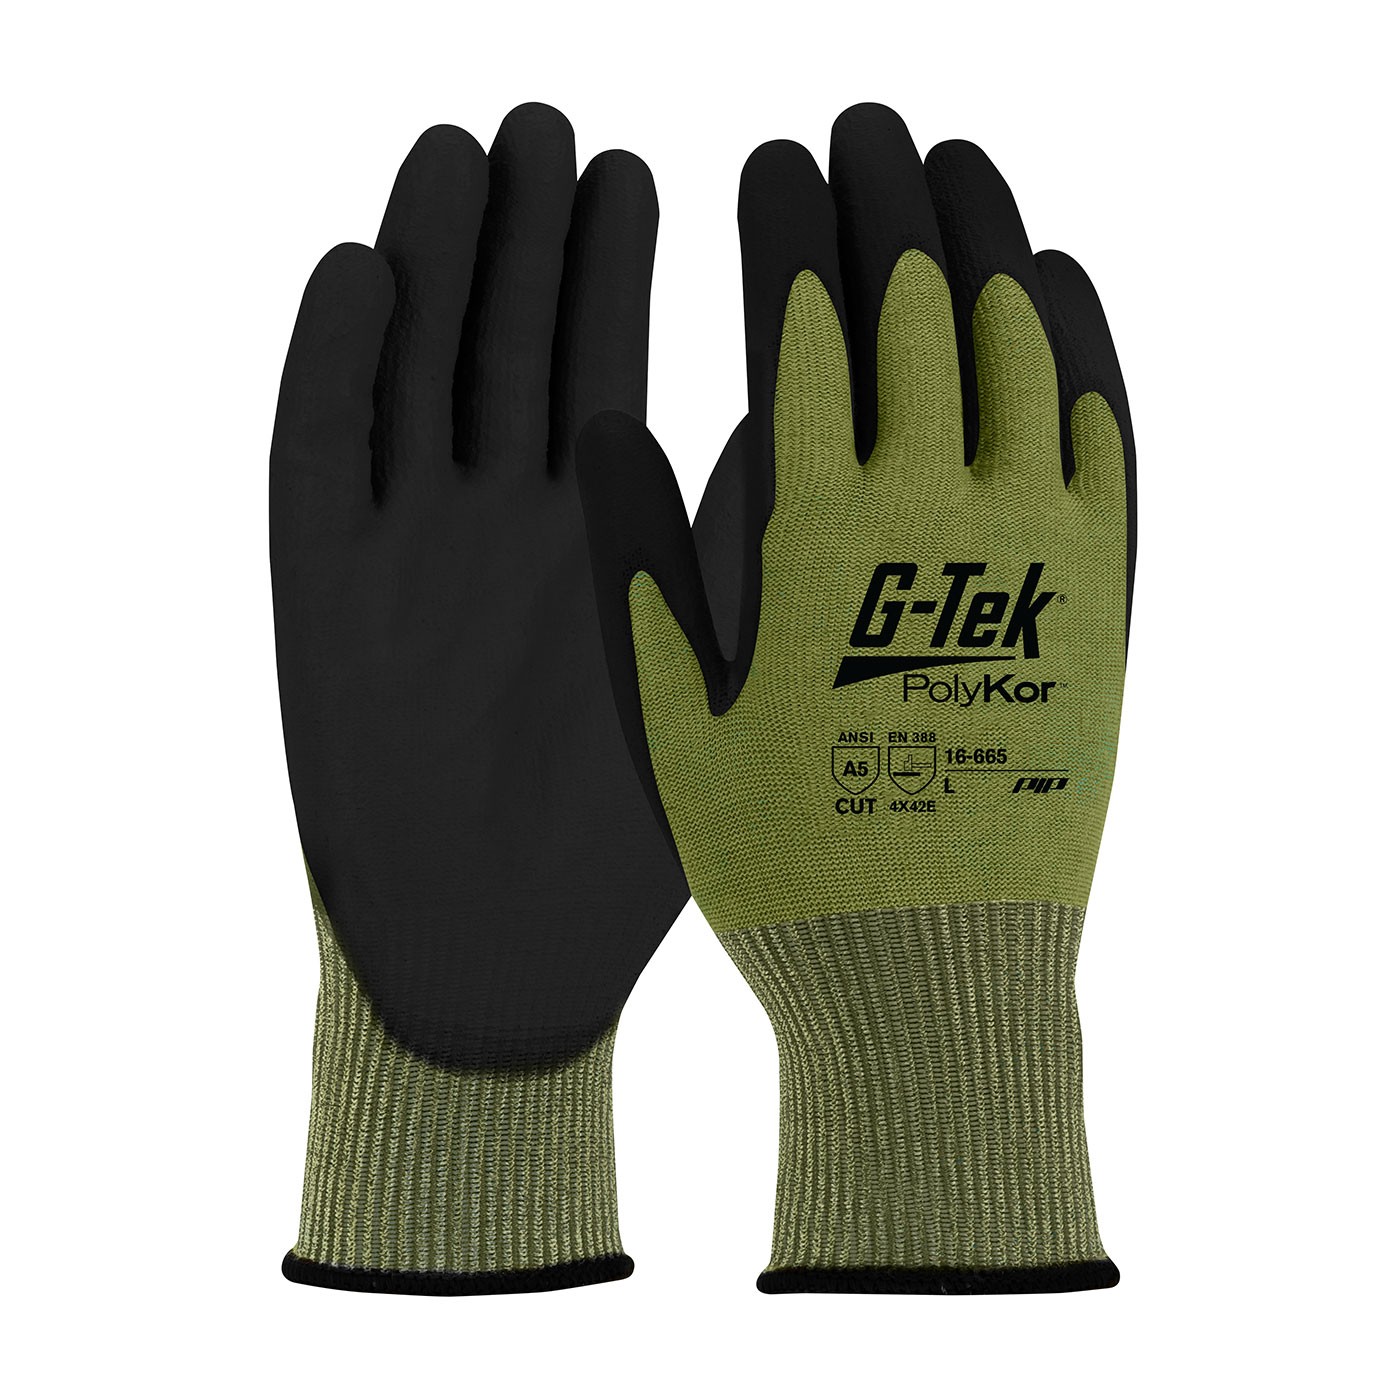 G-Tek® PolyKor® Seamless Knit PolyKor® Blended Glove with Polyurethane Coated Smooth Grip on Palm & Fingers  (#16-665)